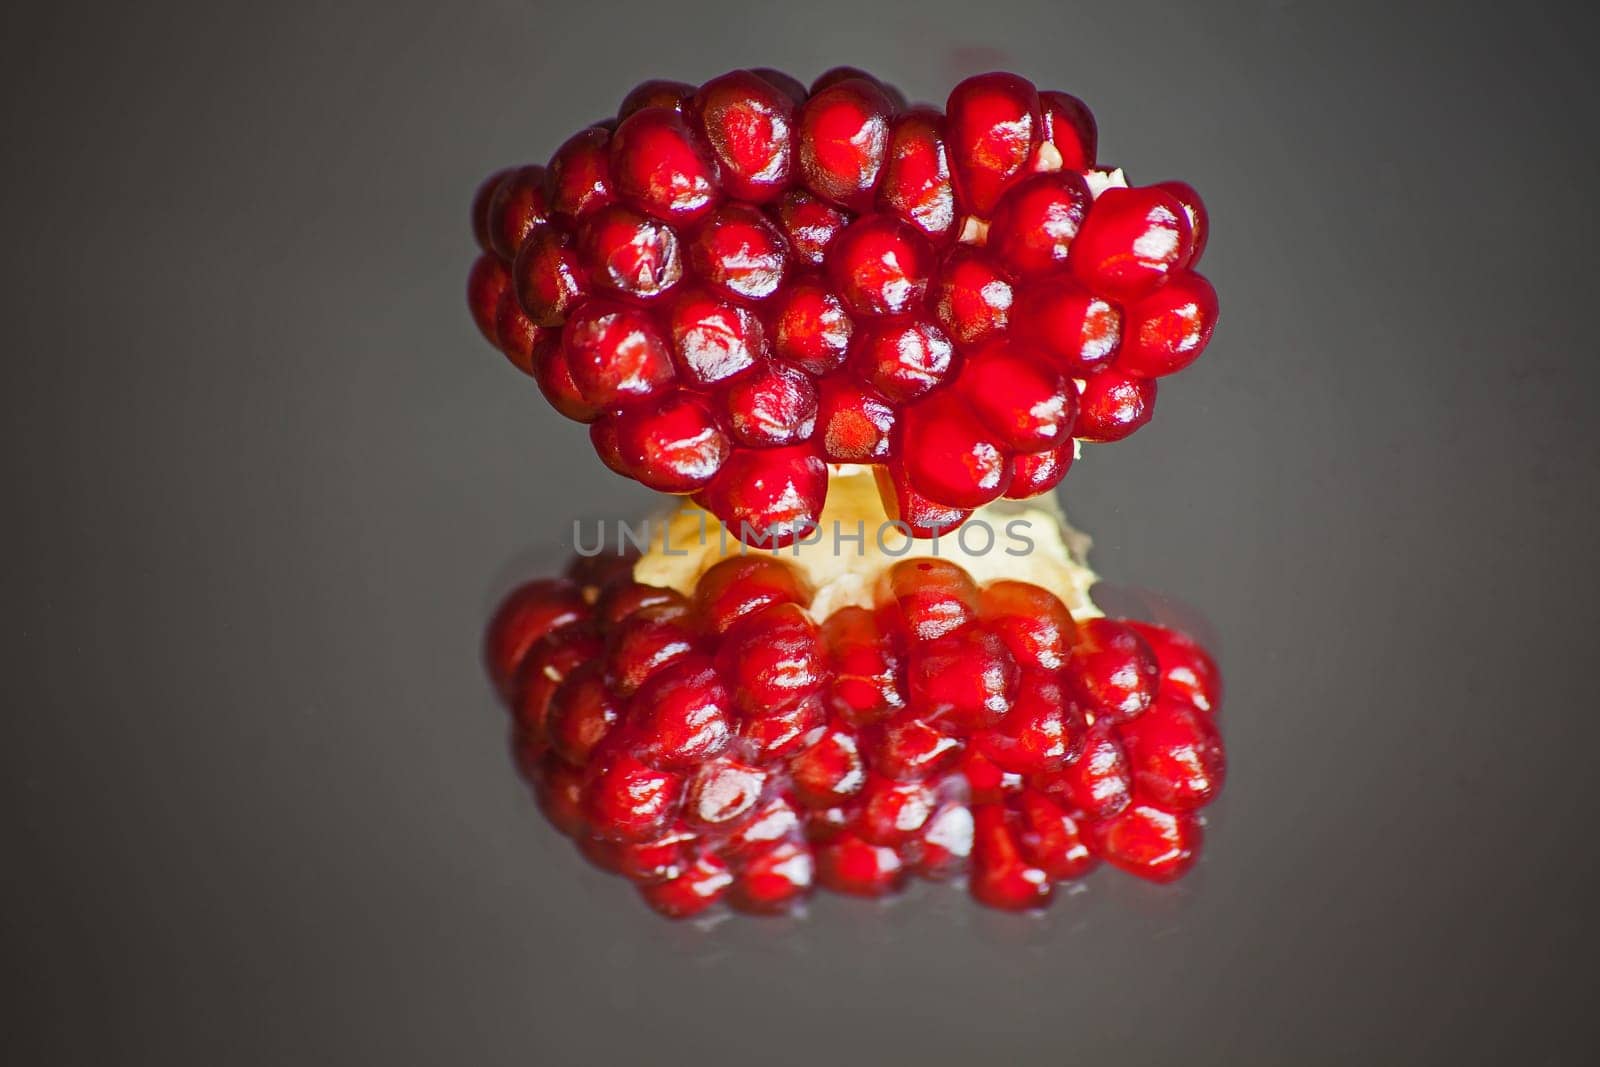 Ripe Pomegranate seeds reflected 10600 by kobus_peche